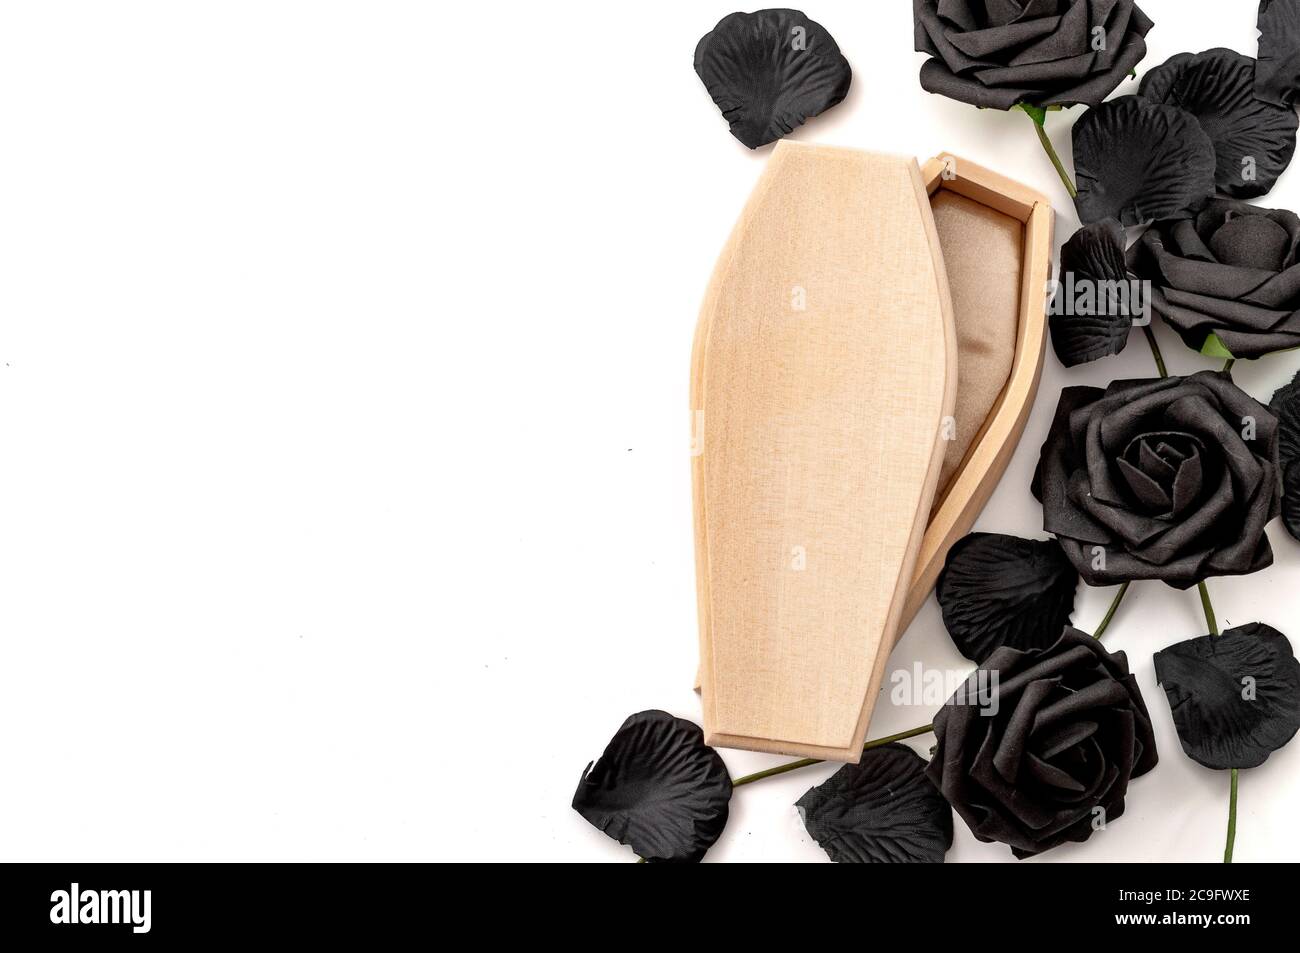 Last goodbye, grief for the deceased and sadness of losing loved ones concept with wood coffin surrounded by black roses isolated on white background Stock Photo